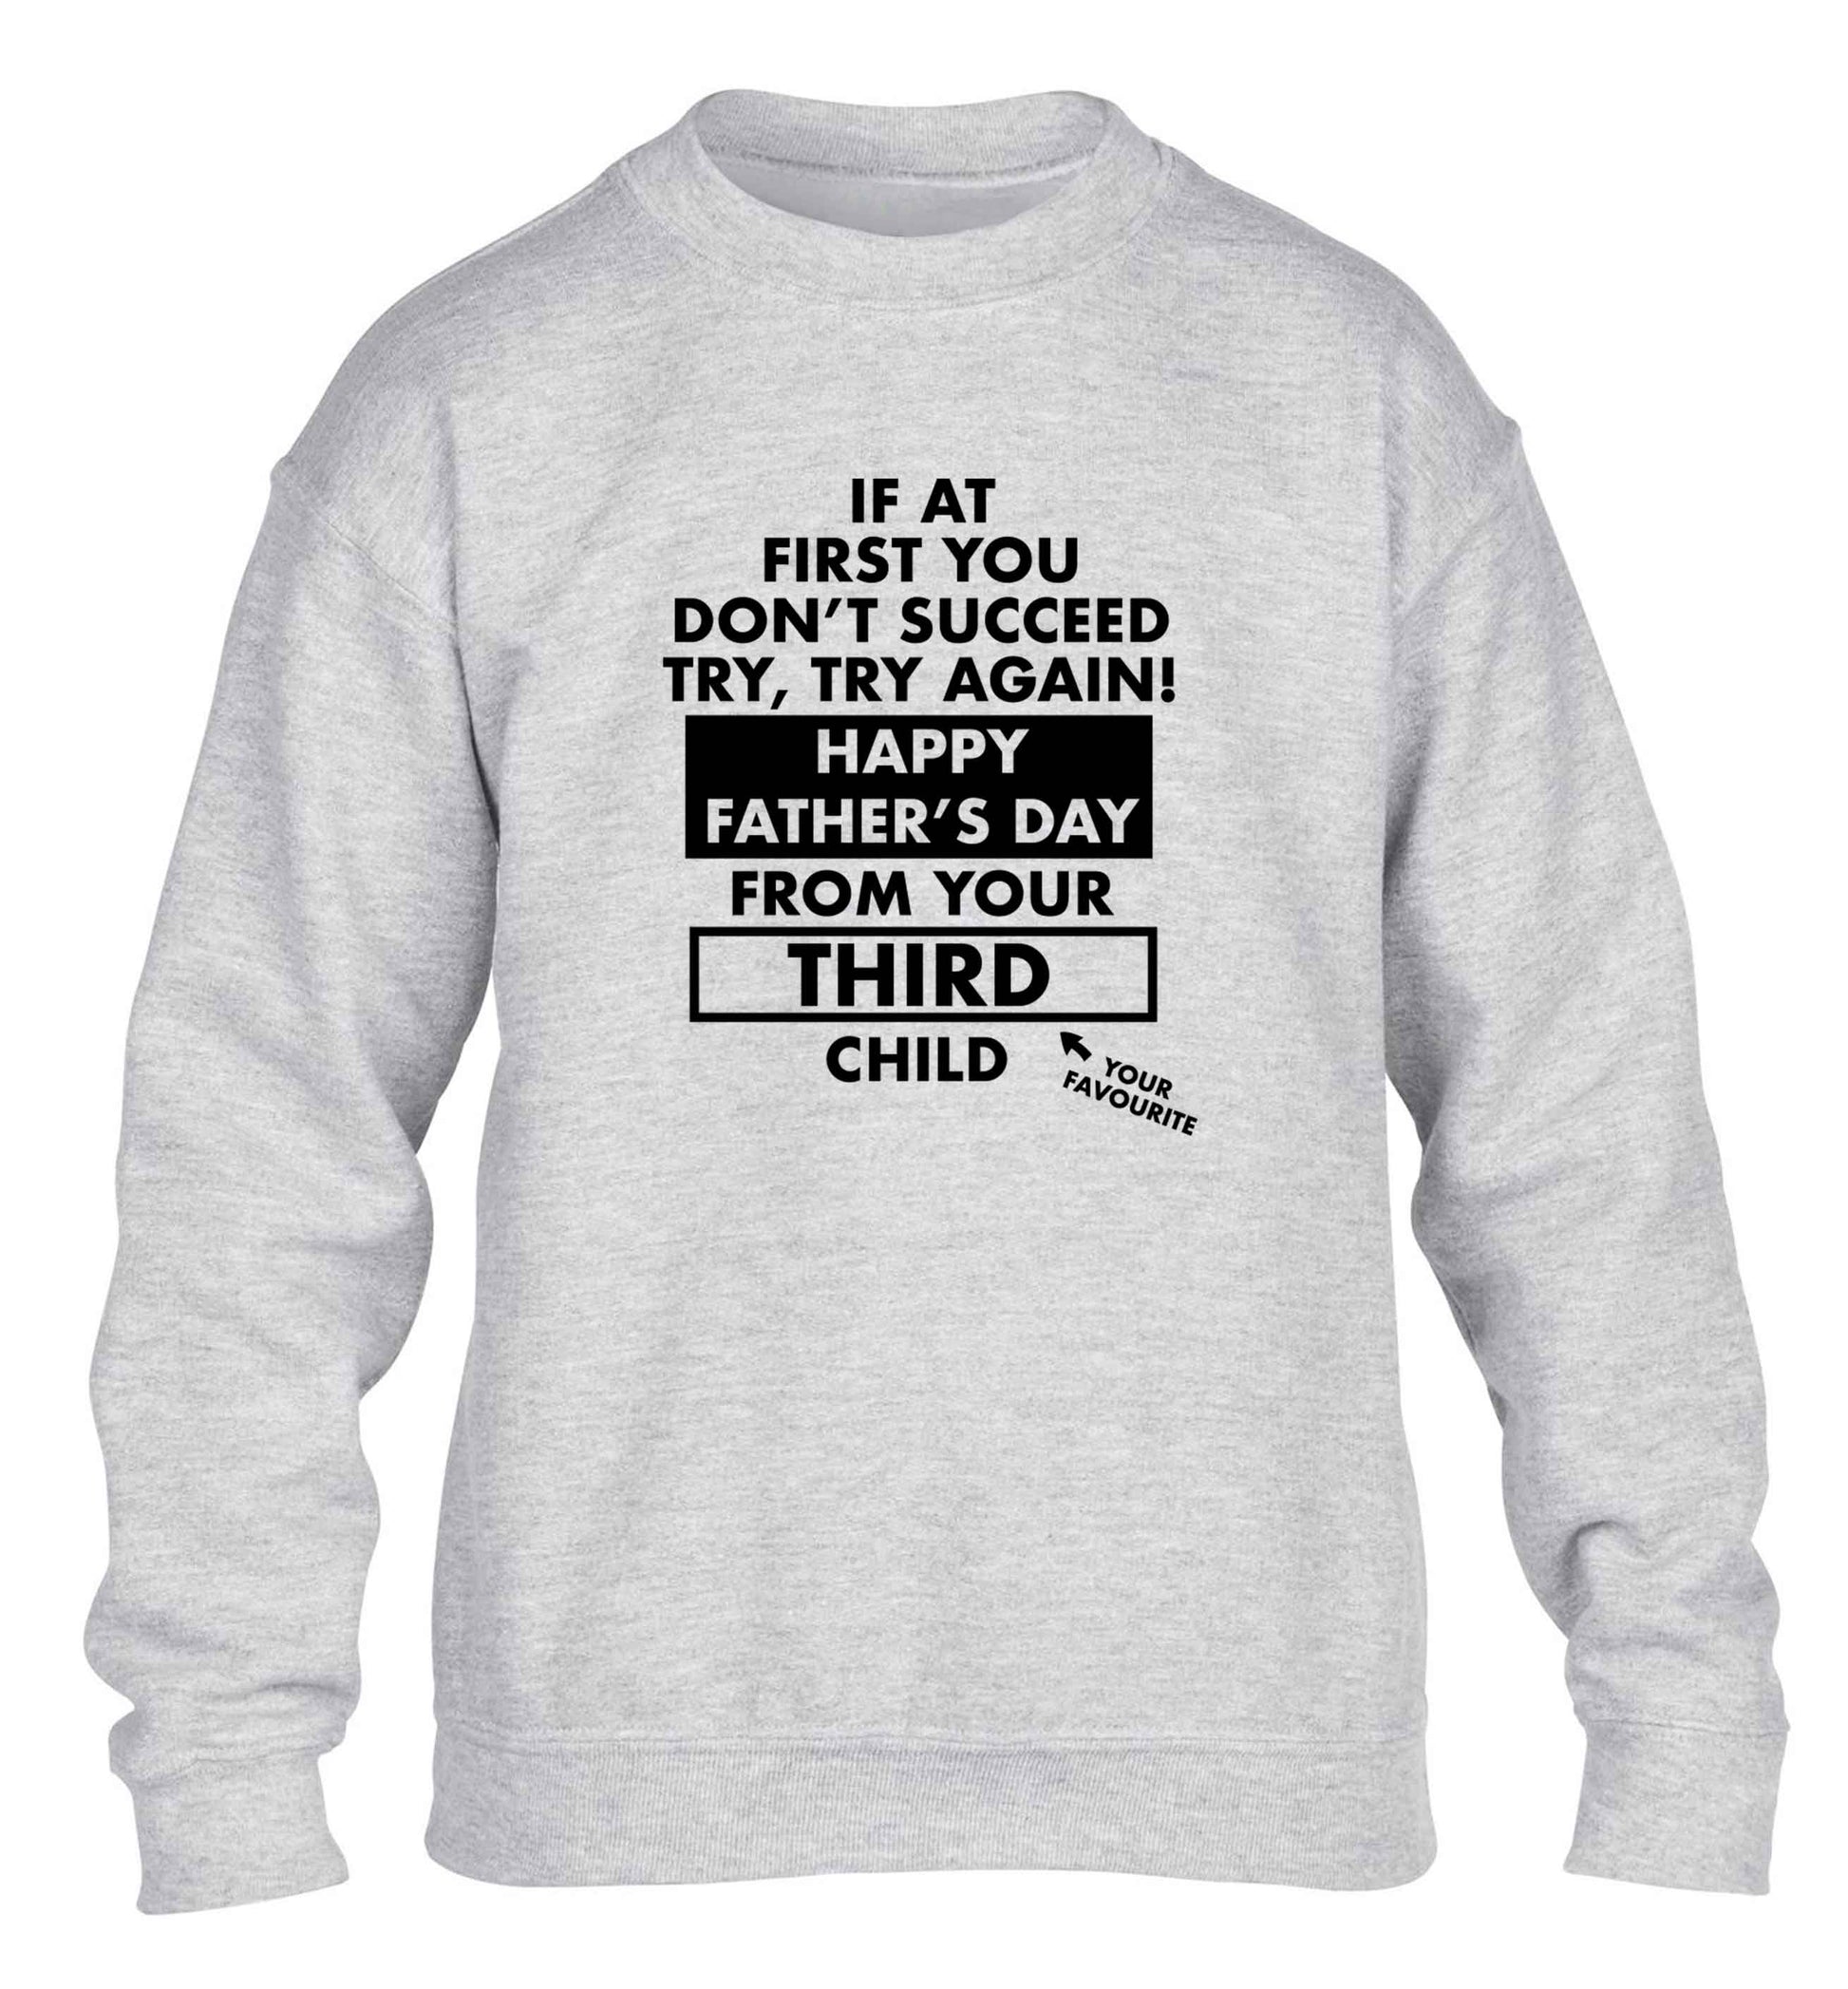 If at first you don't succeed try, try again Happy Father's day from your third child! children's grey sweater 12-13 Years